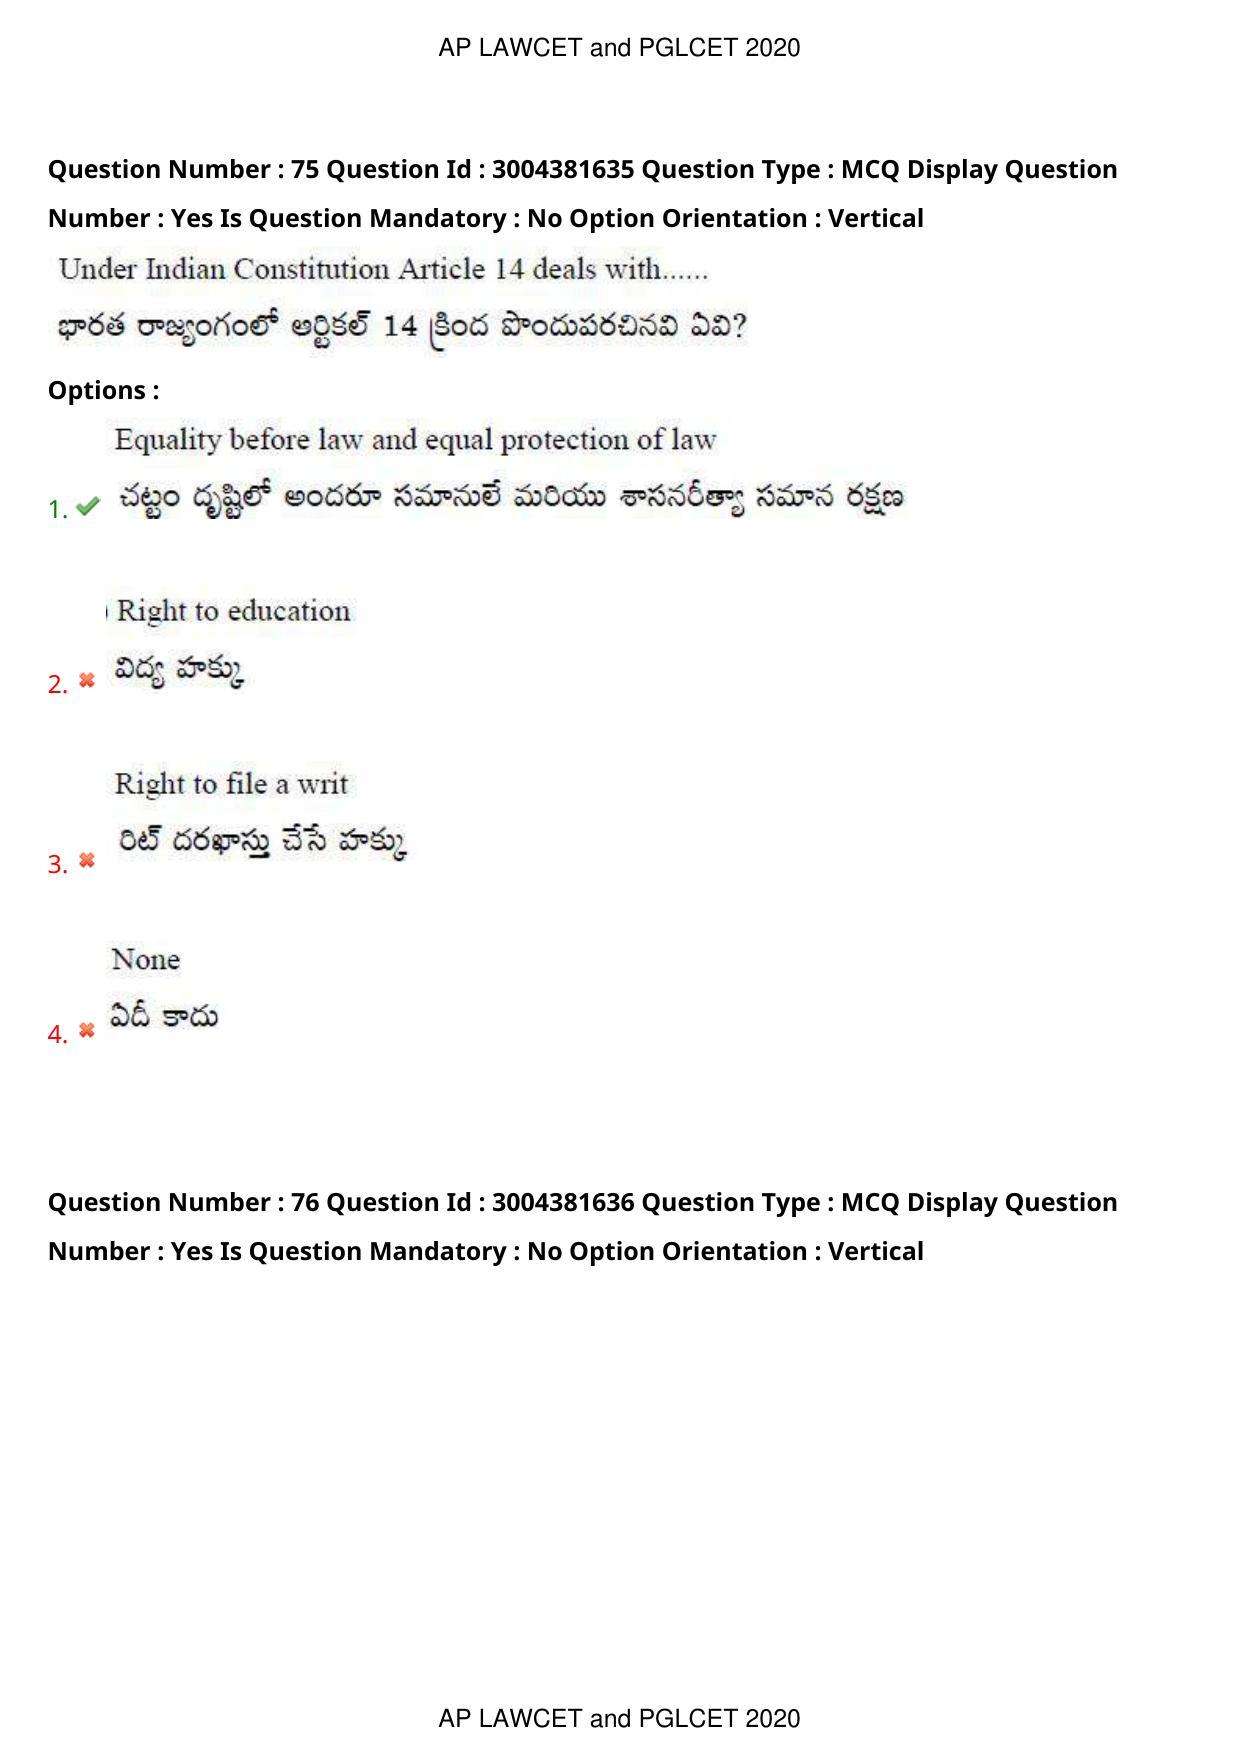 AP LAWCET 2020 - 5 Year LLB Question Paper With Keys - Page 49